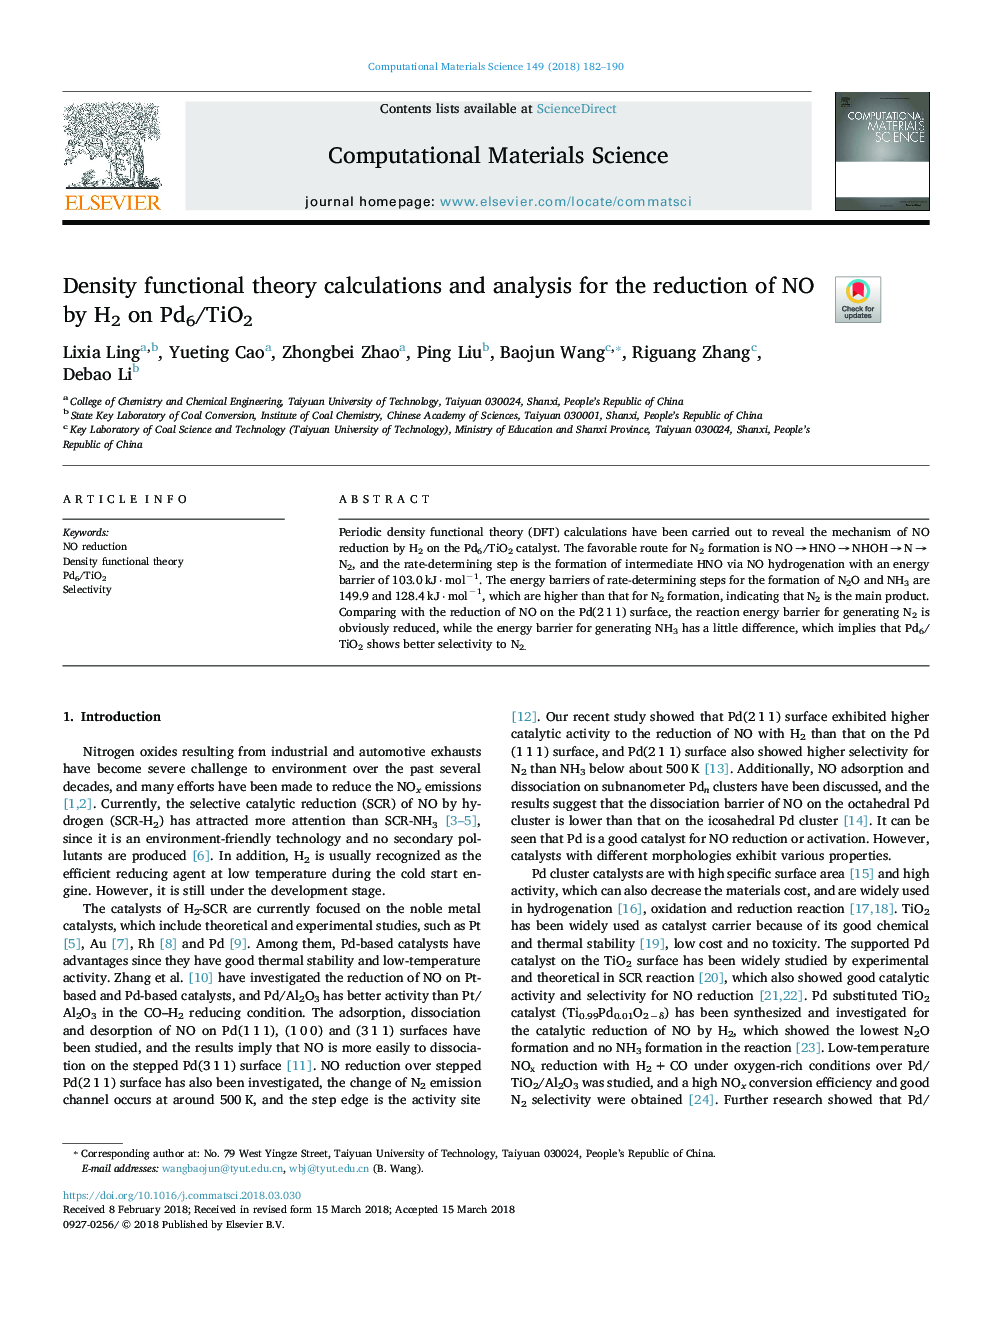 Density functional theory calculations and analysis for the reduction of NO by H2 on Pd6/TiO2